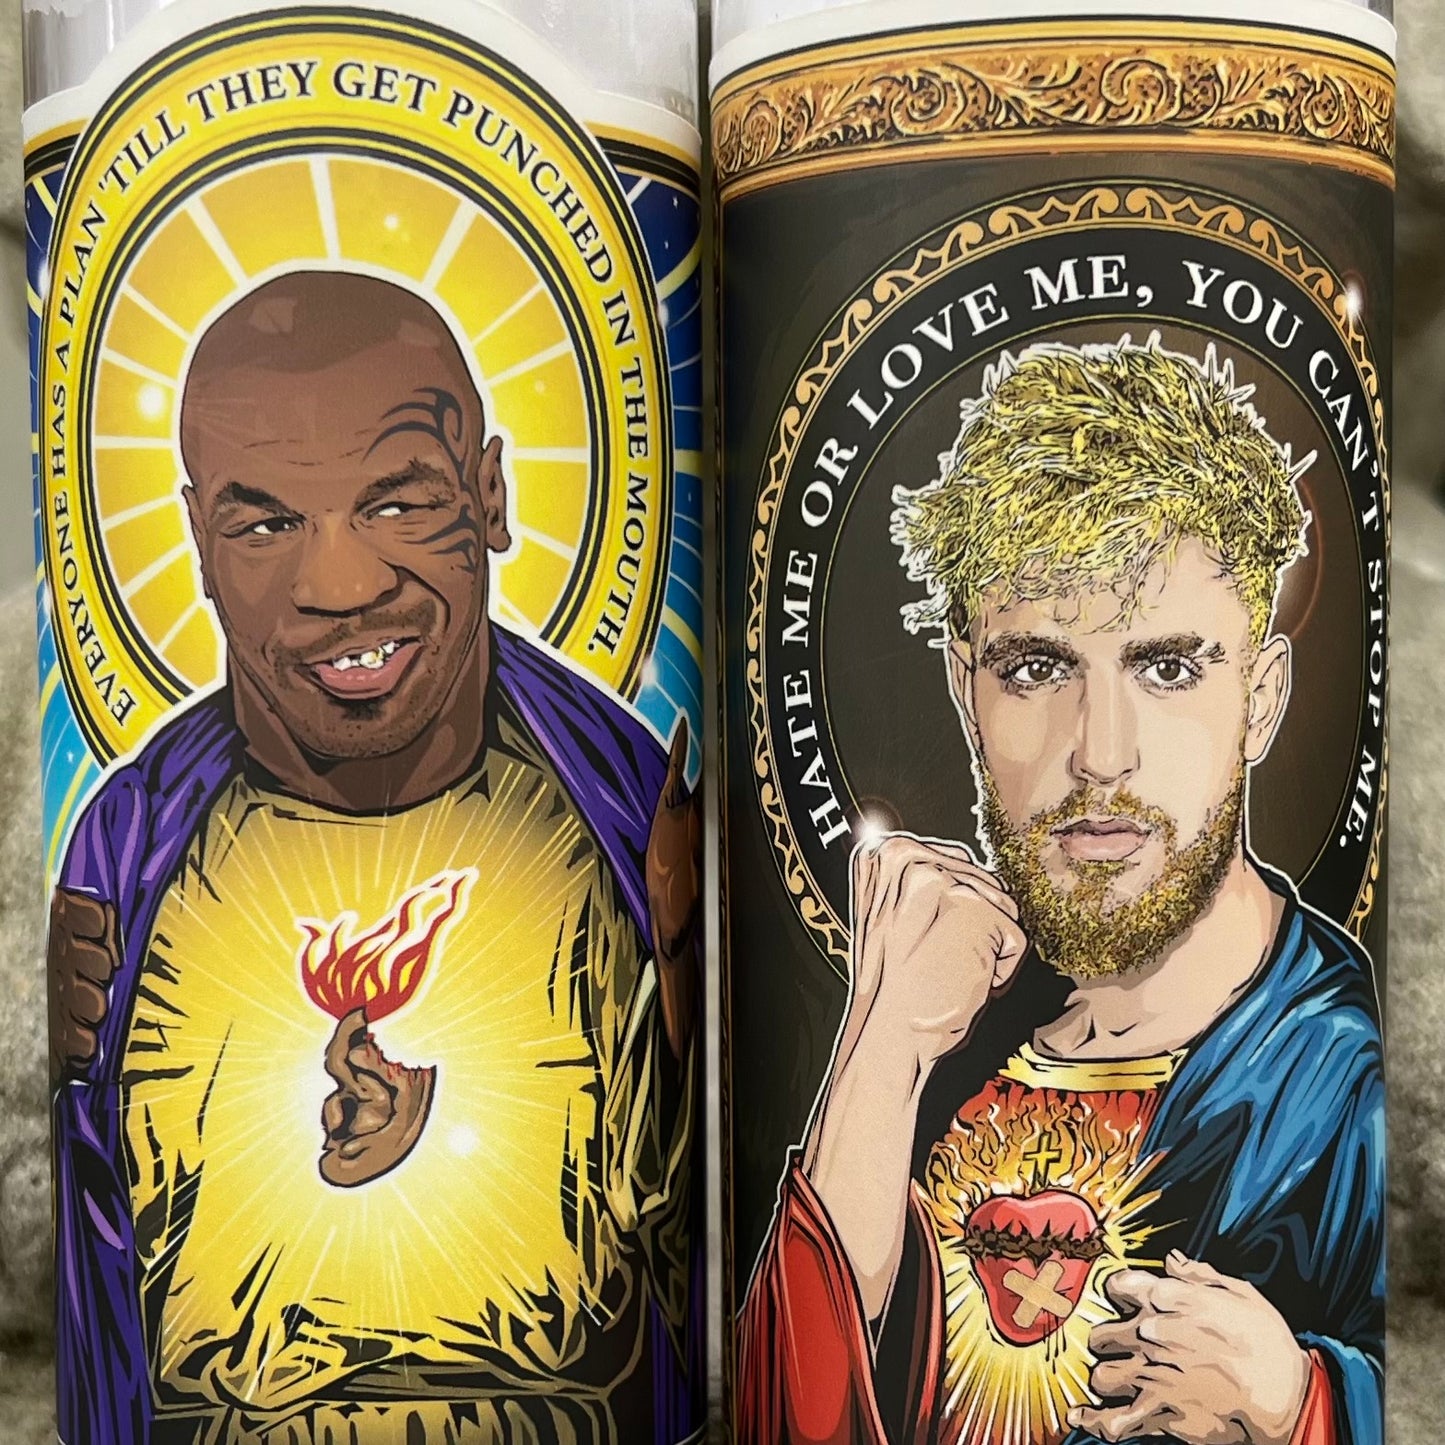 Saint Iron Mike The Undisputed Candle